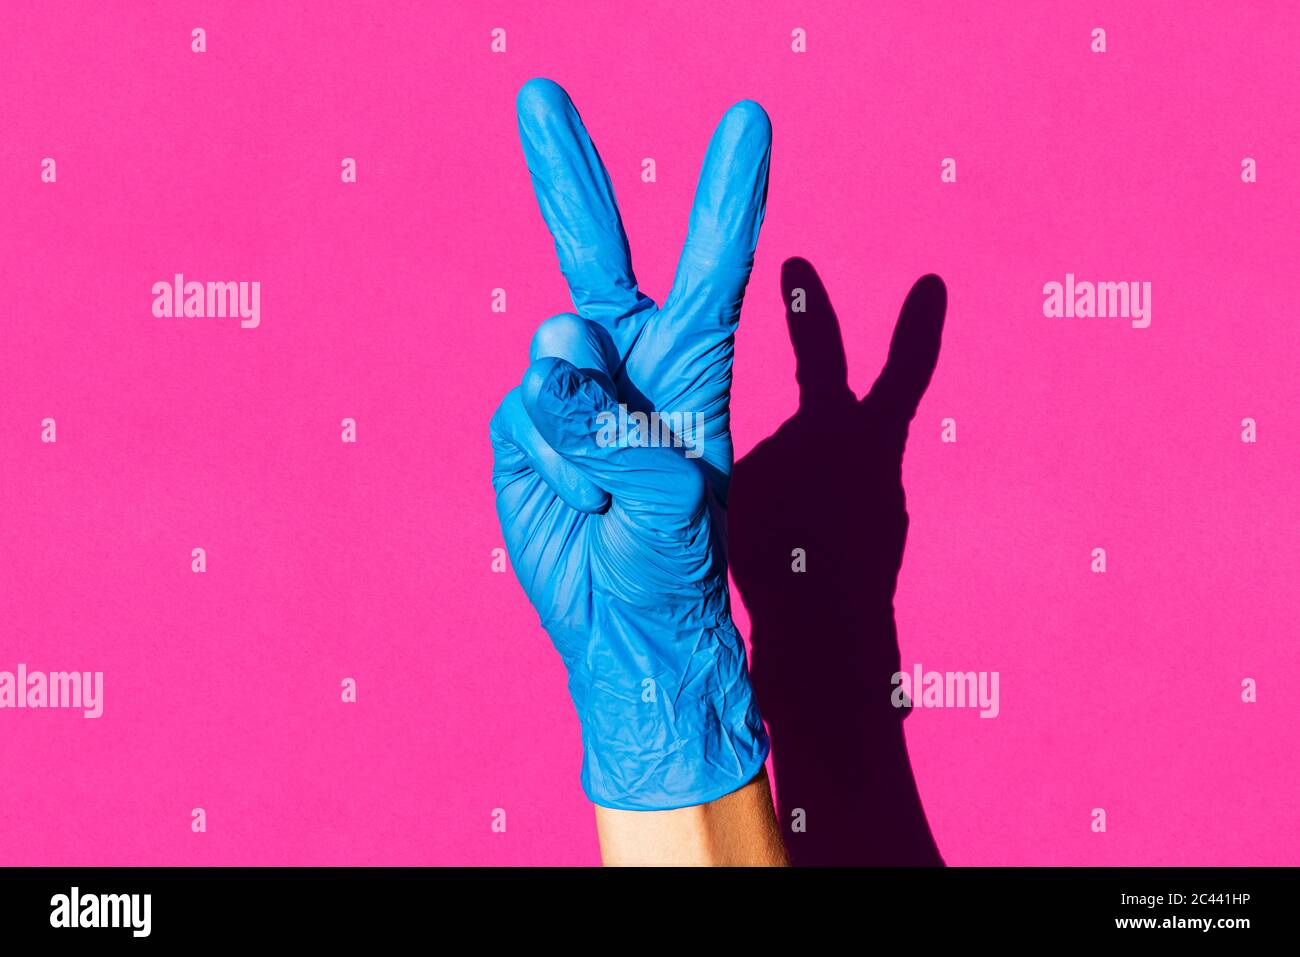 Hand of woman wearing latex glove making V sign Stock Photo